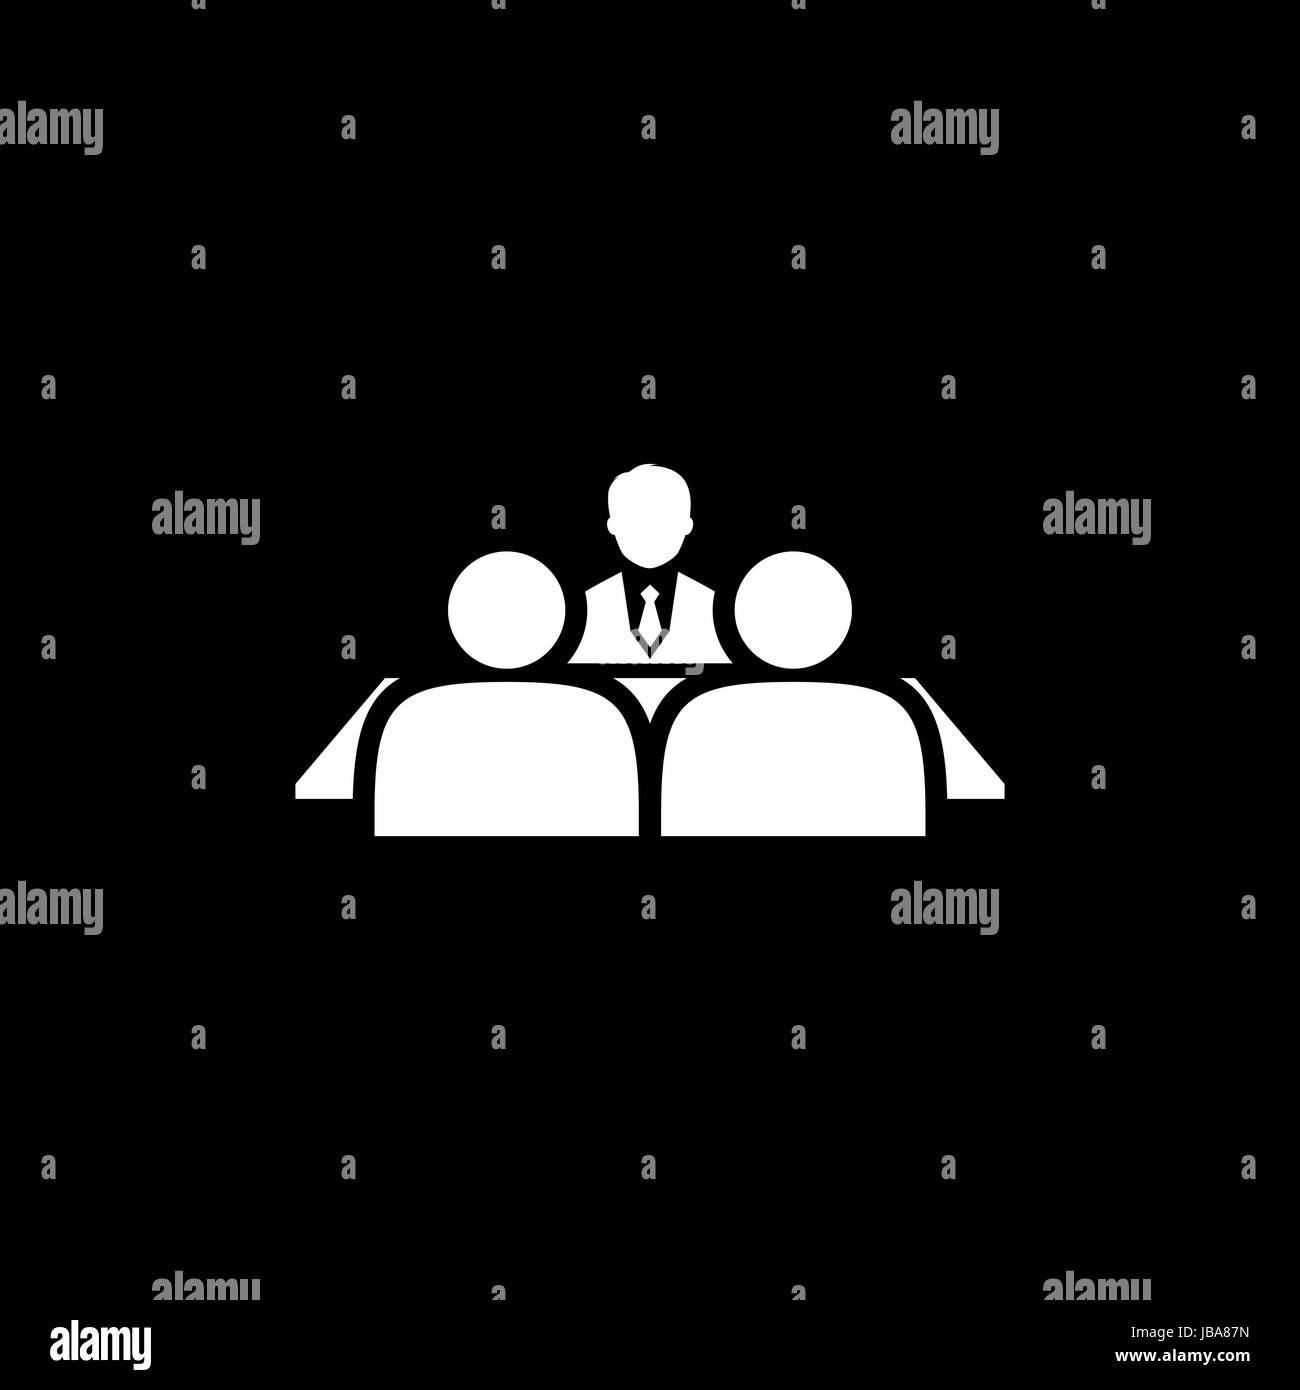 Conversation Icon. Flat Design. Business Concept. Isolated Illustration. Stock Vector